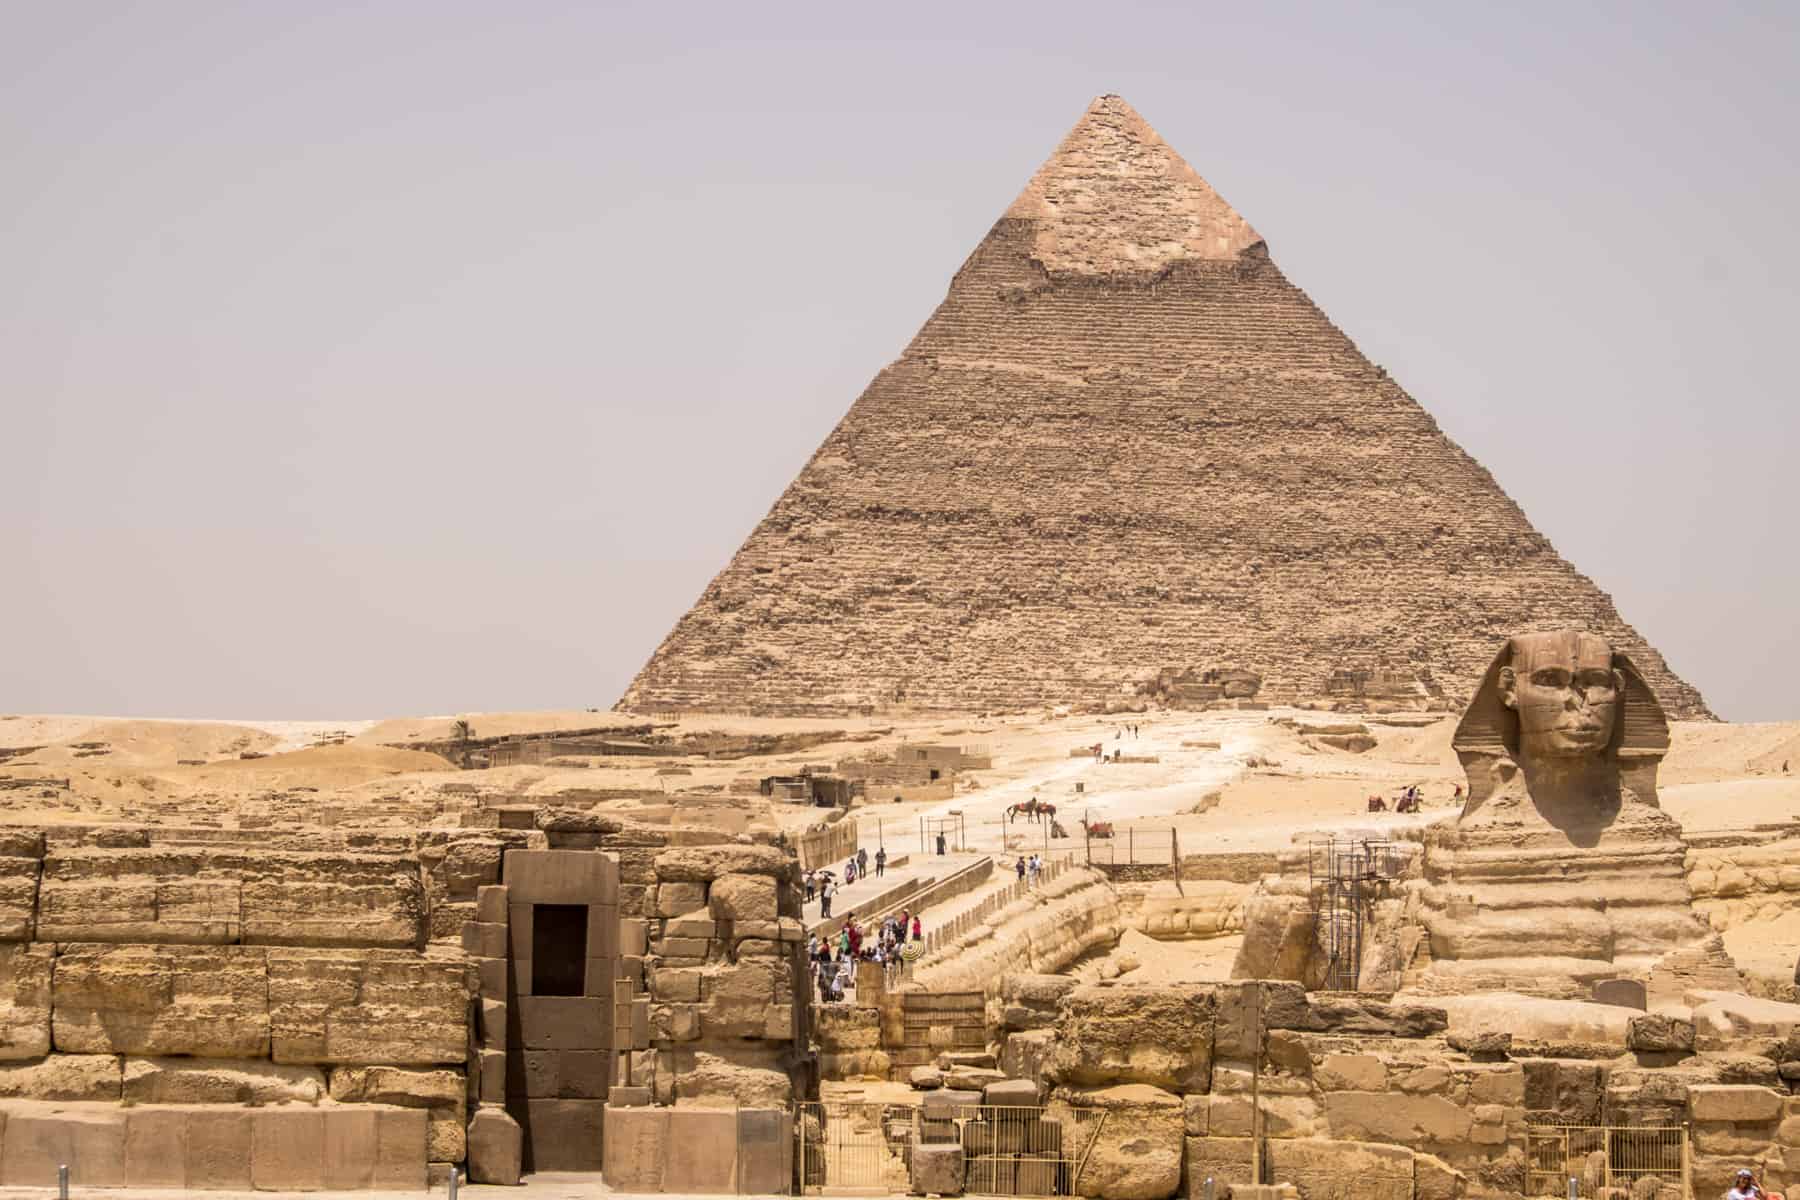 A great pyramid of Giza looms behind the sphinx that sits in front of it as part of a necropolis complex, in the dusty desert area of Giza in Egypt